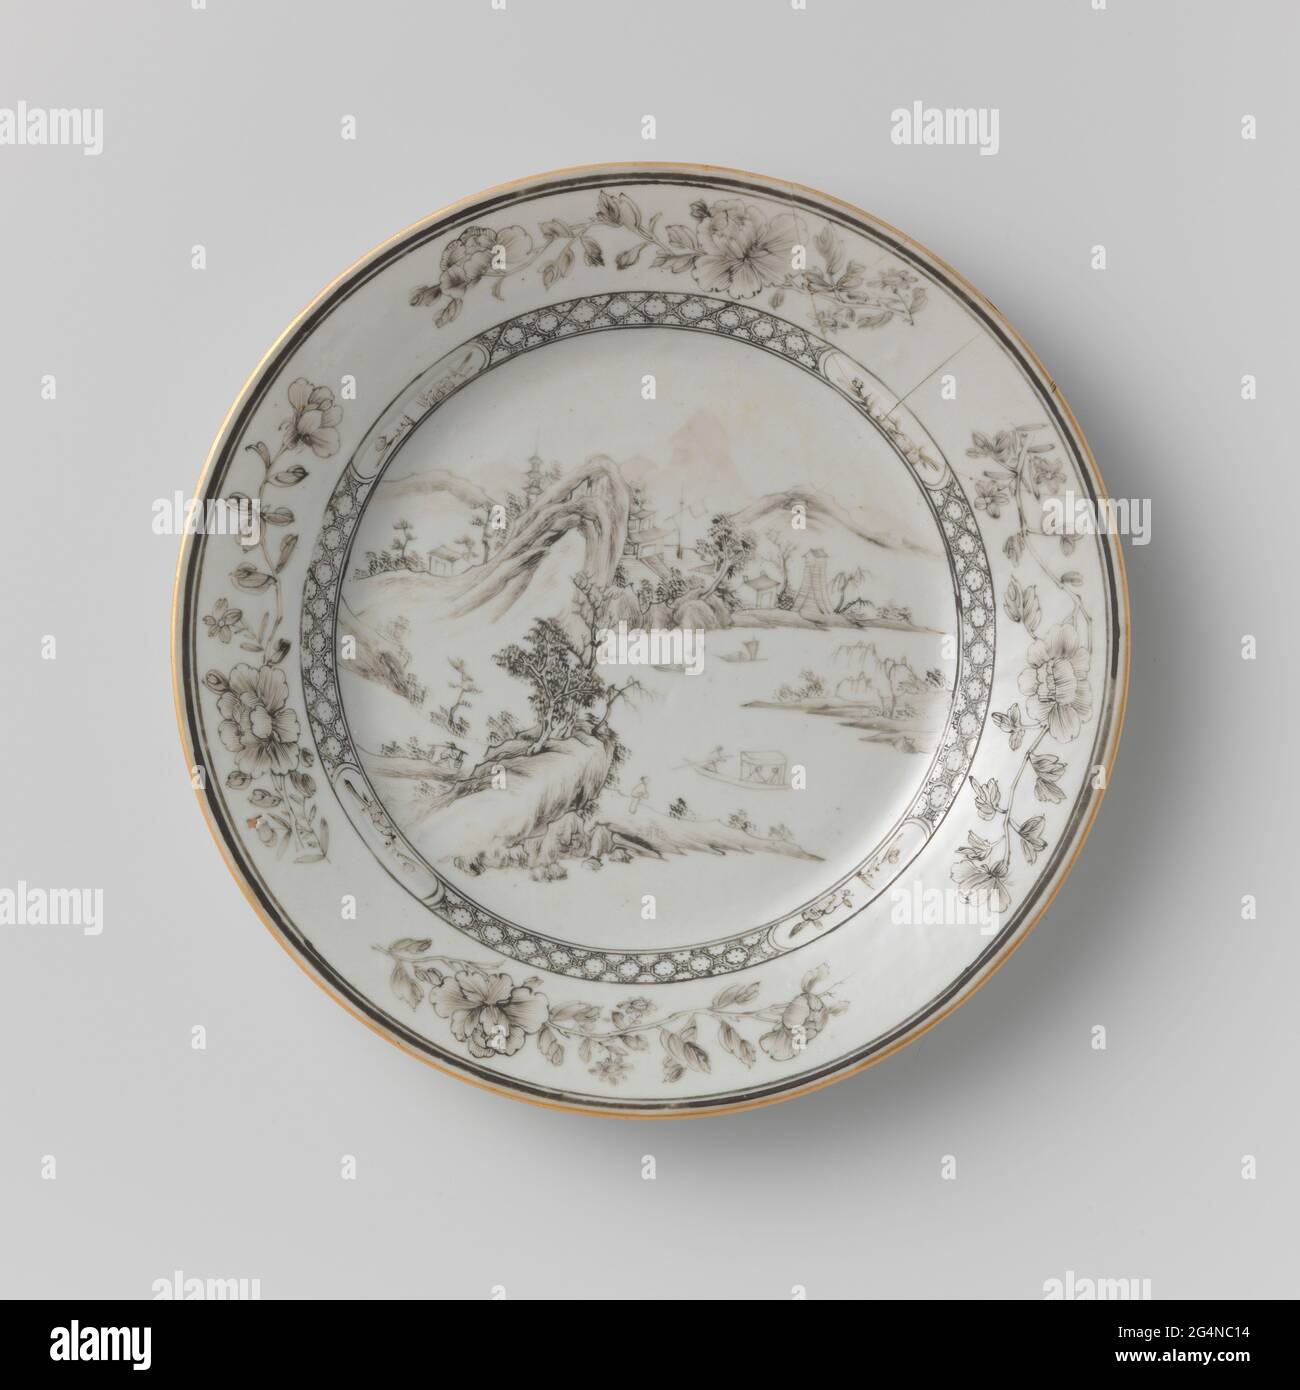 Plate with a Riverlandscape and Flower Sprays. Porcelain plate, painted on the glaze in black and gold. On the flat a river landscape with mountains, trees, houses and people in boats; the wall with napkin interspersed with flower branches in cartouches; The edge with four flower branches. Edge has been broken. Encre the chine. Stock Photo